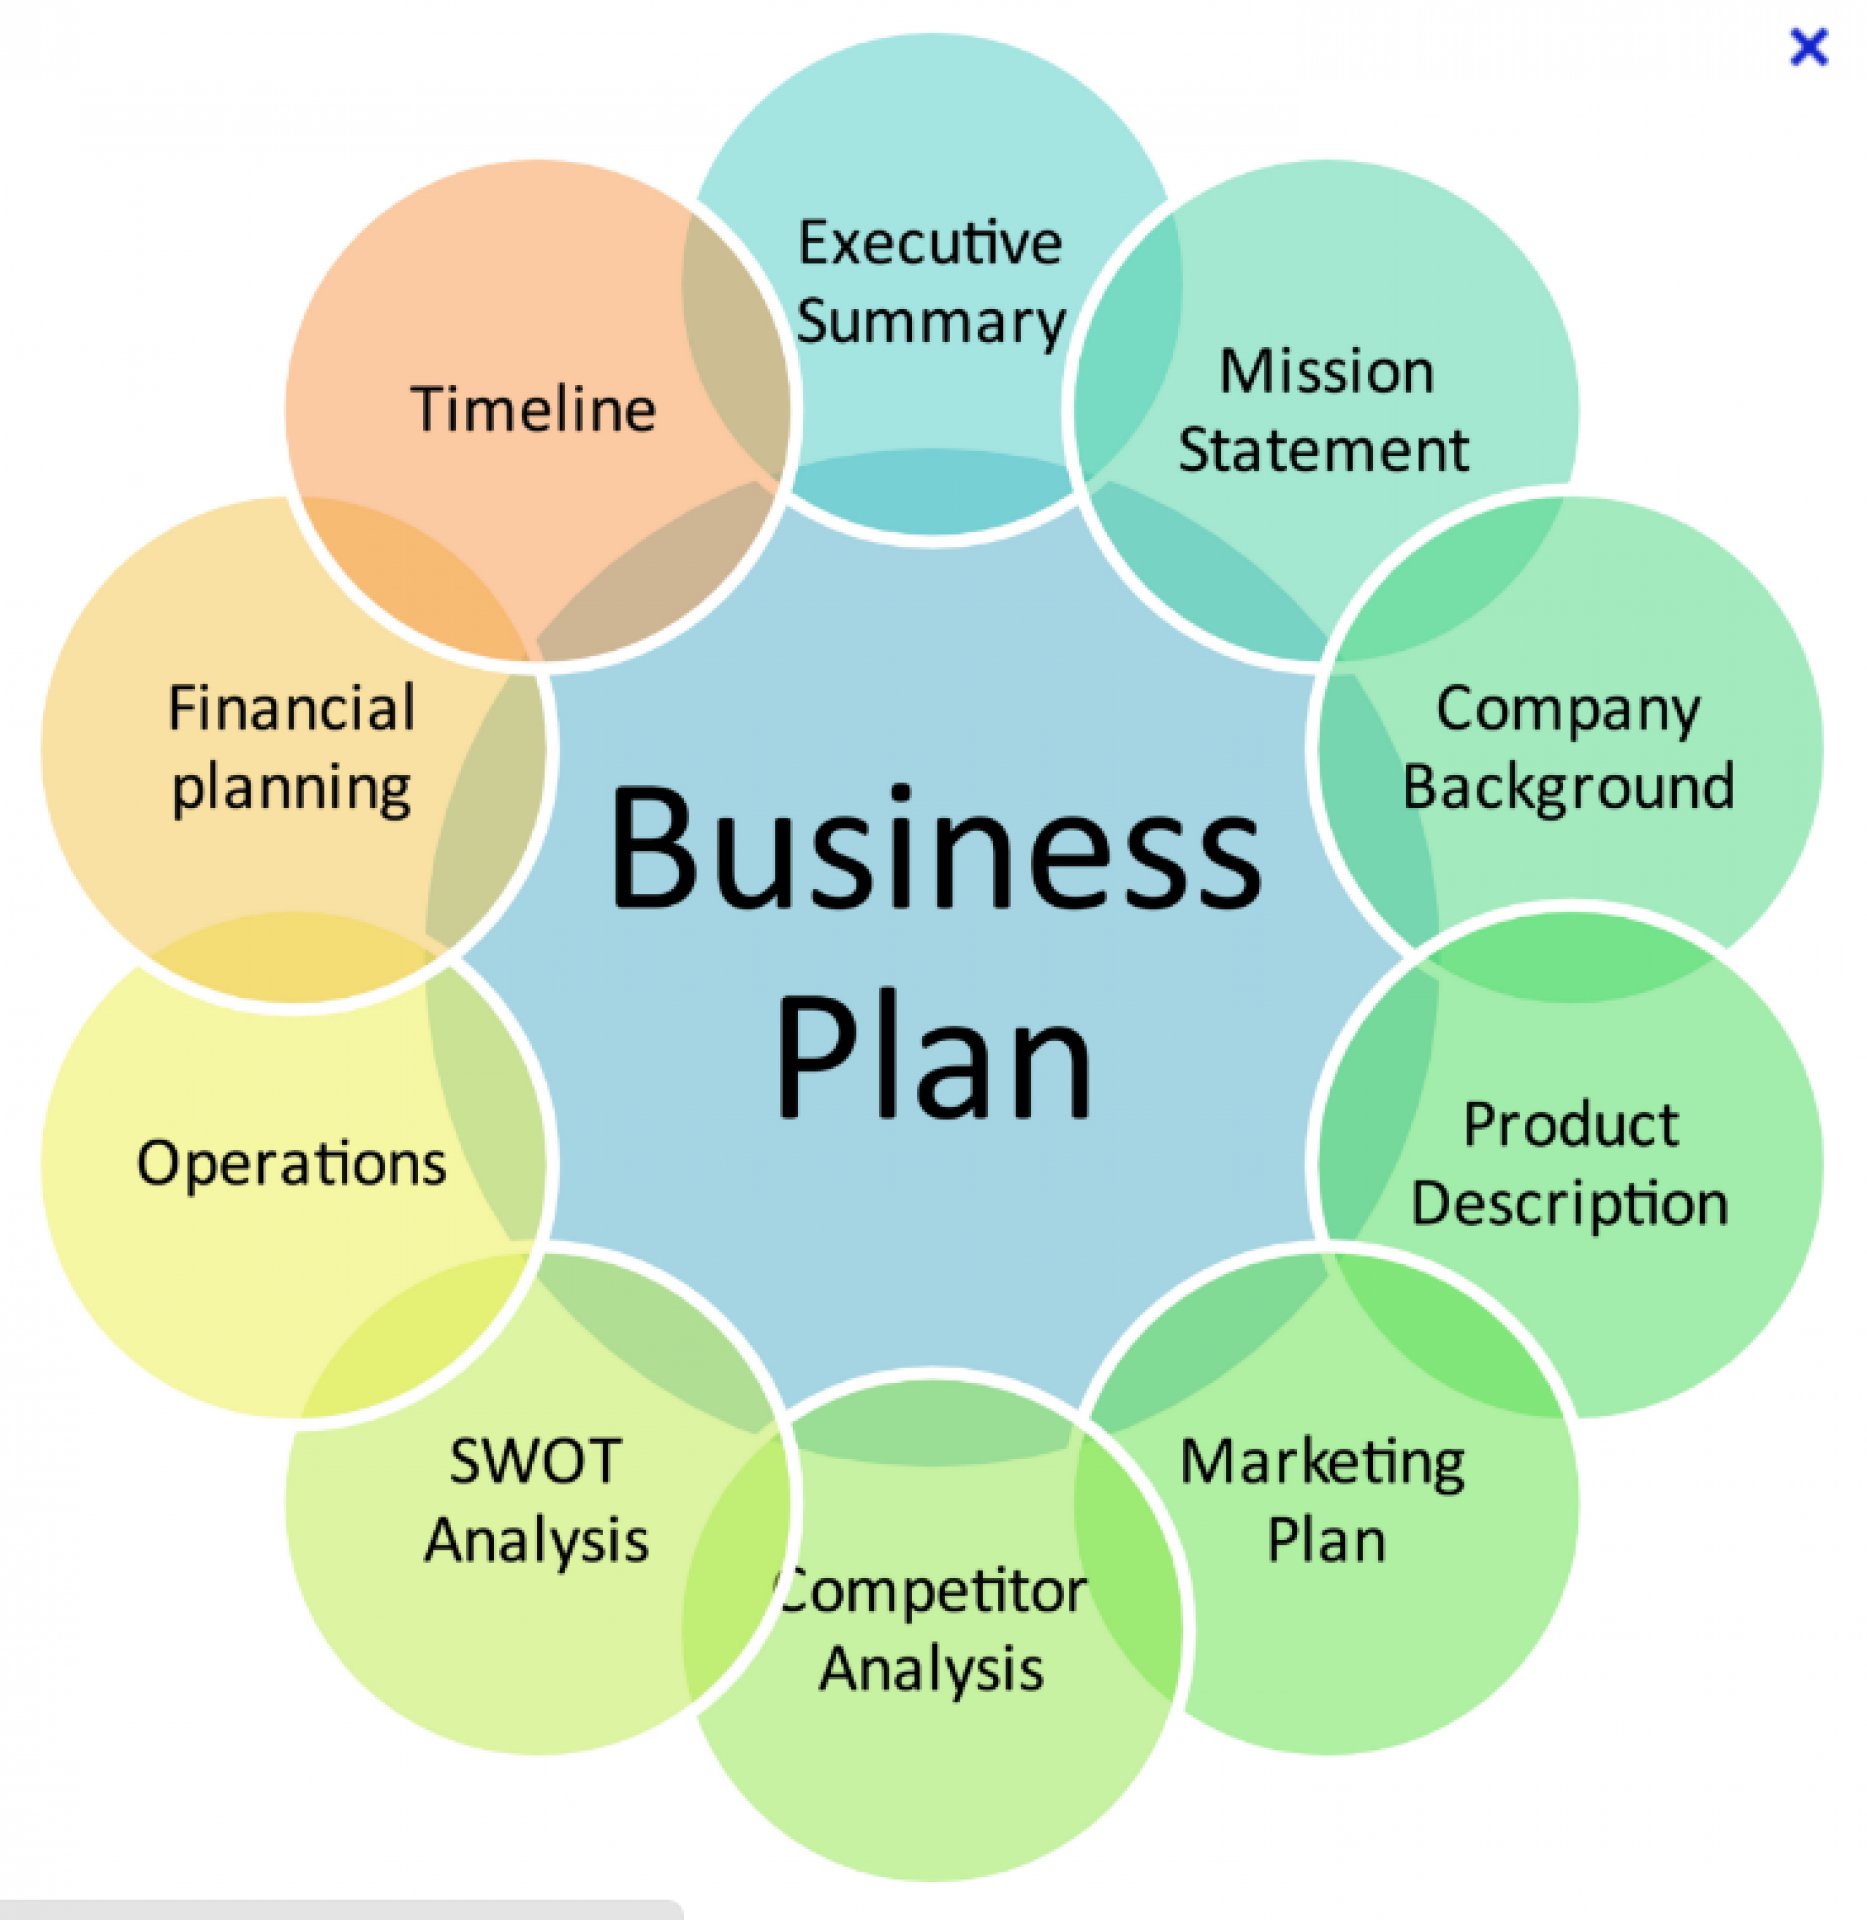 how to startup business plan